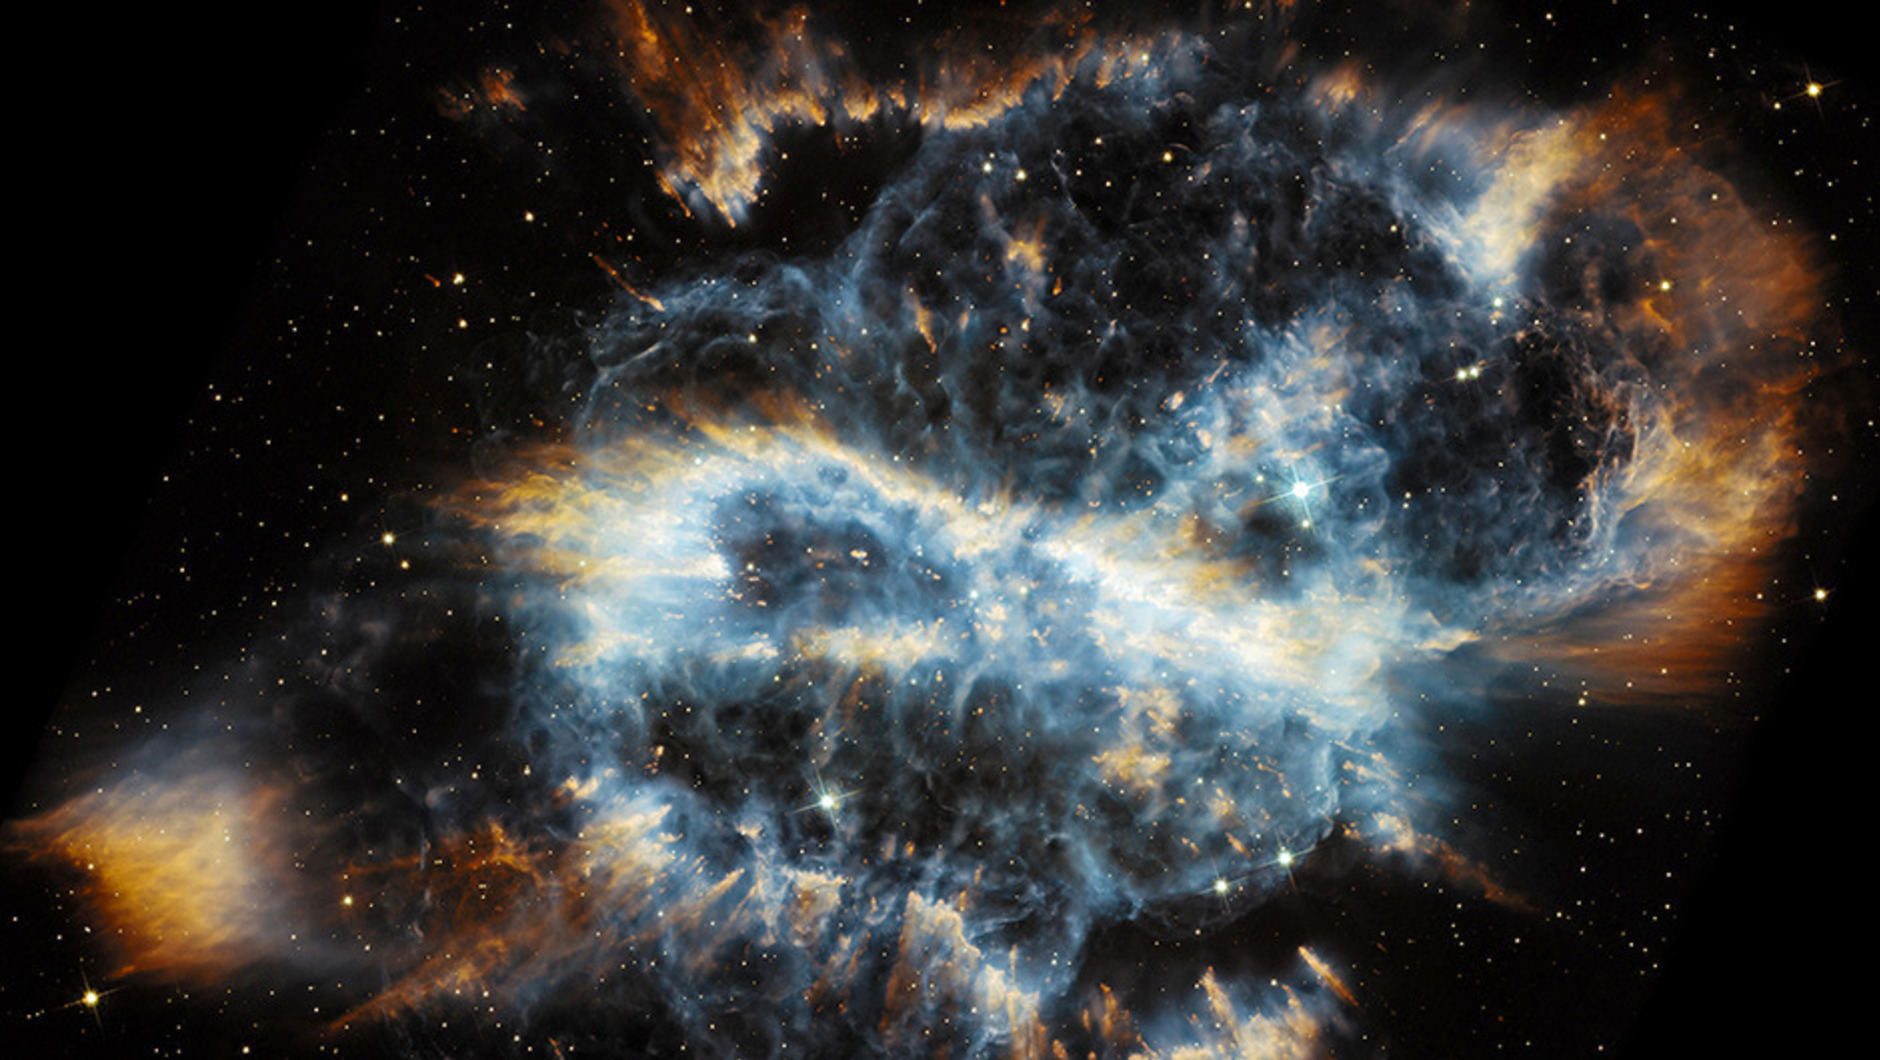 Where Do Messy Planetary Nebulae Come From?